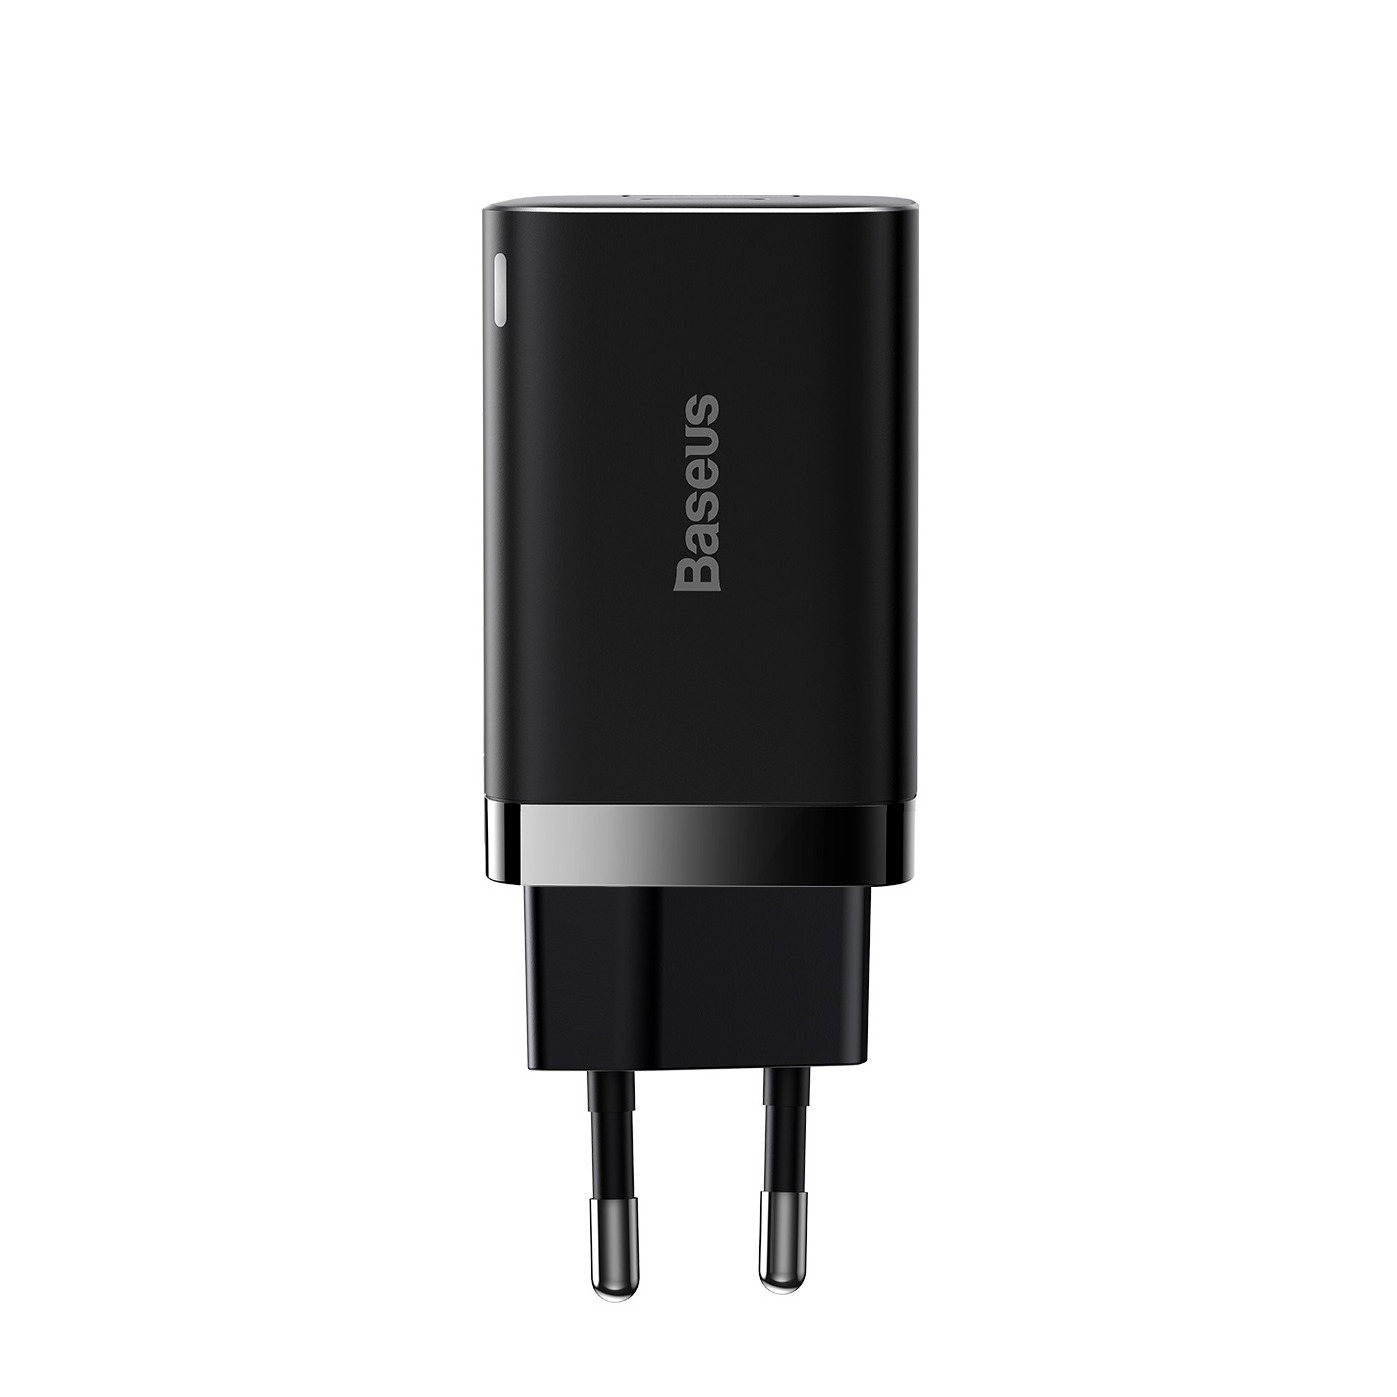 Image of Baseus - (30W) USB / USB C Quick Charge QC 3.0 Ladegerät mit Power Delivery 3.0 - Schwarz bei Apfelkiste.ch